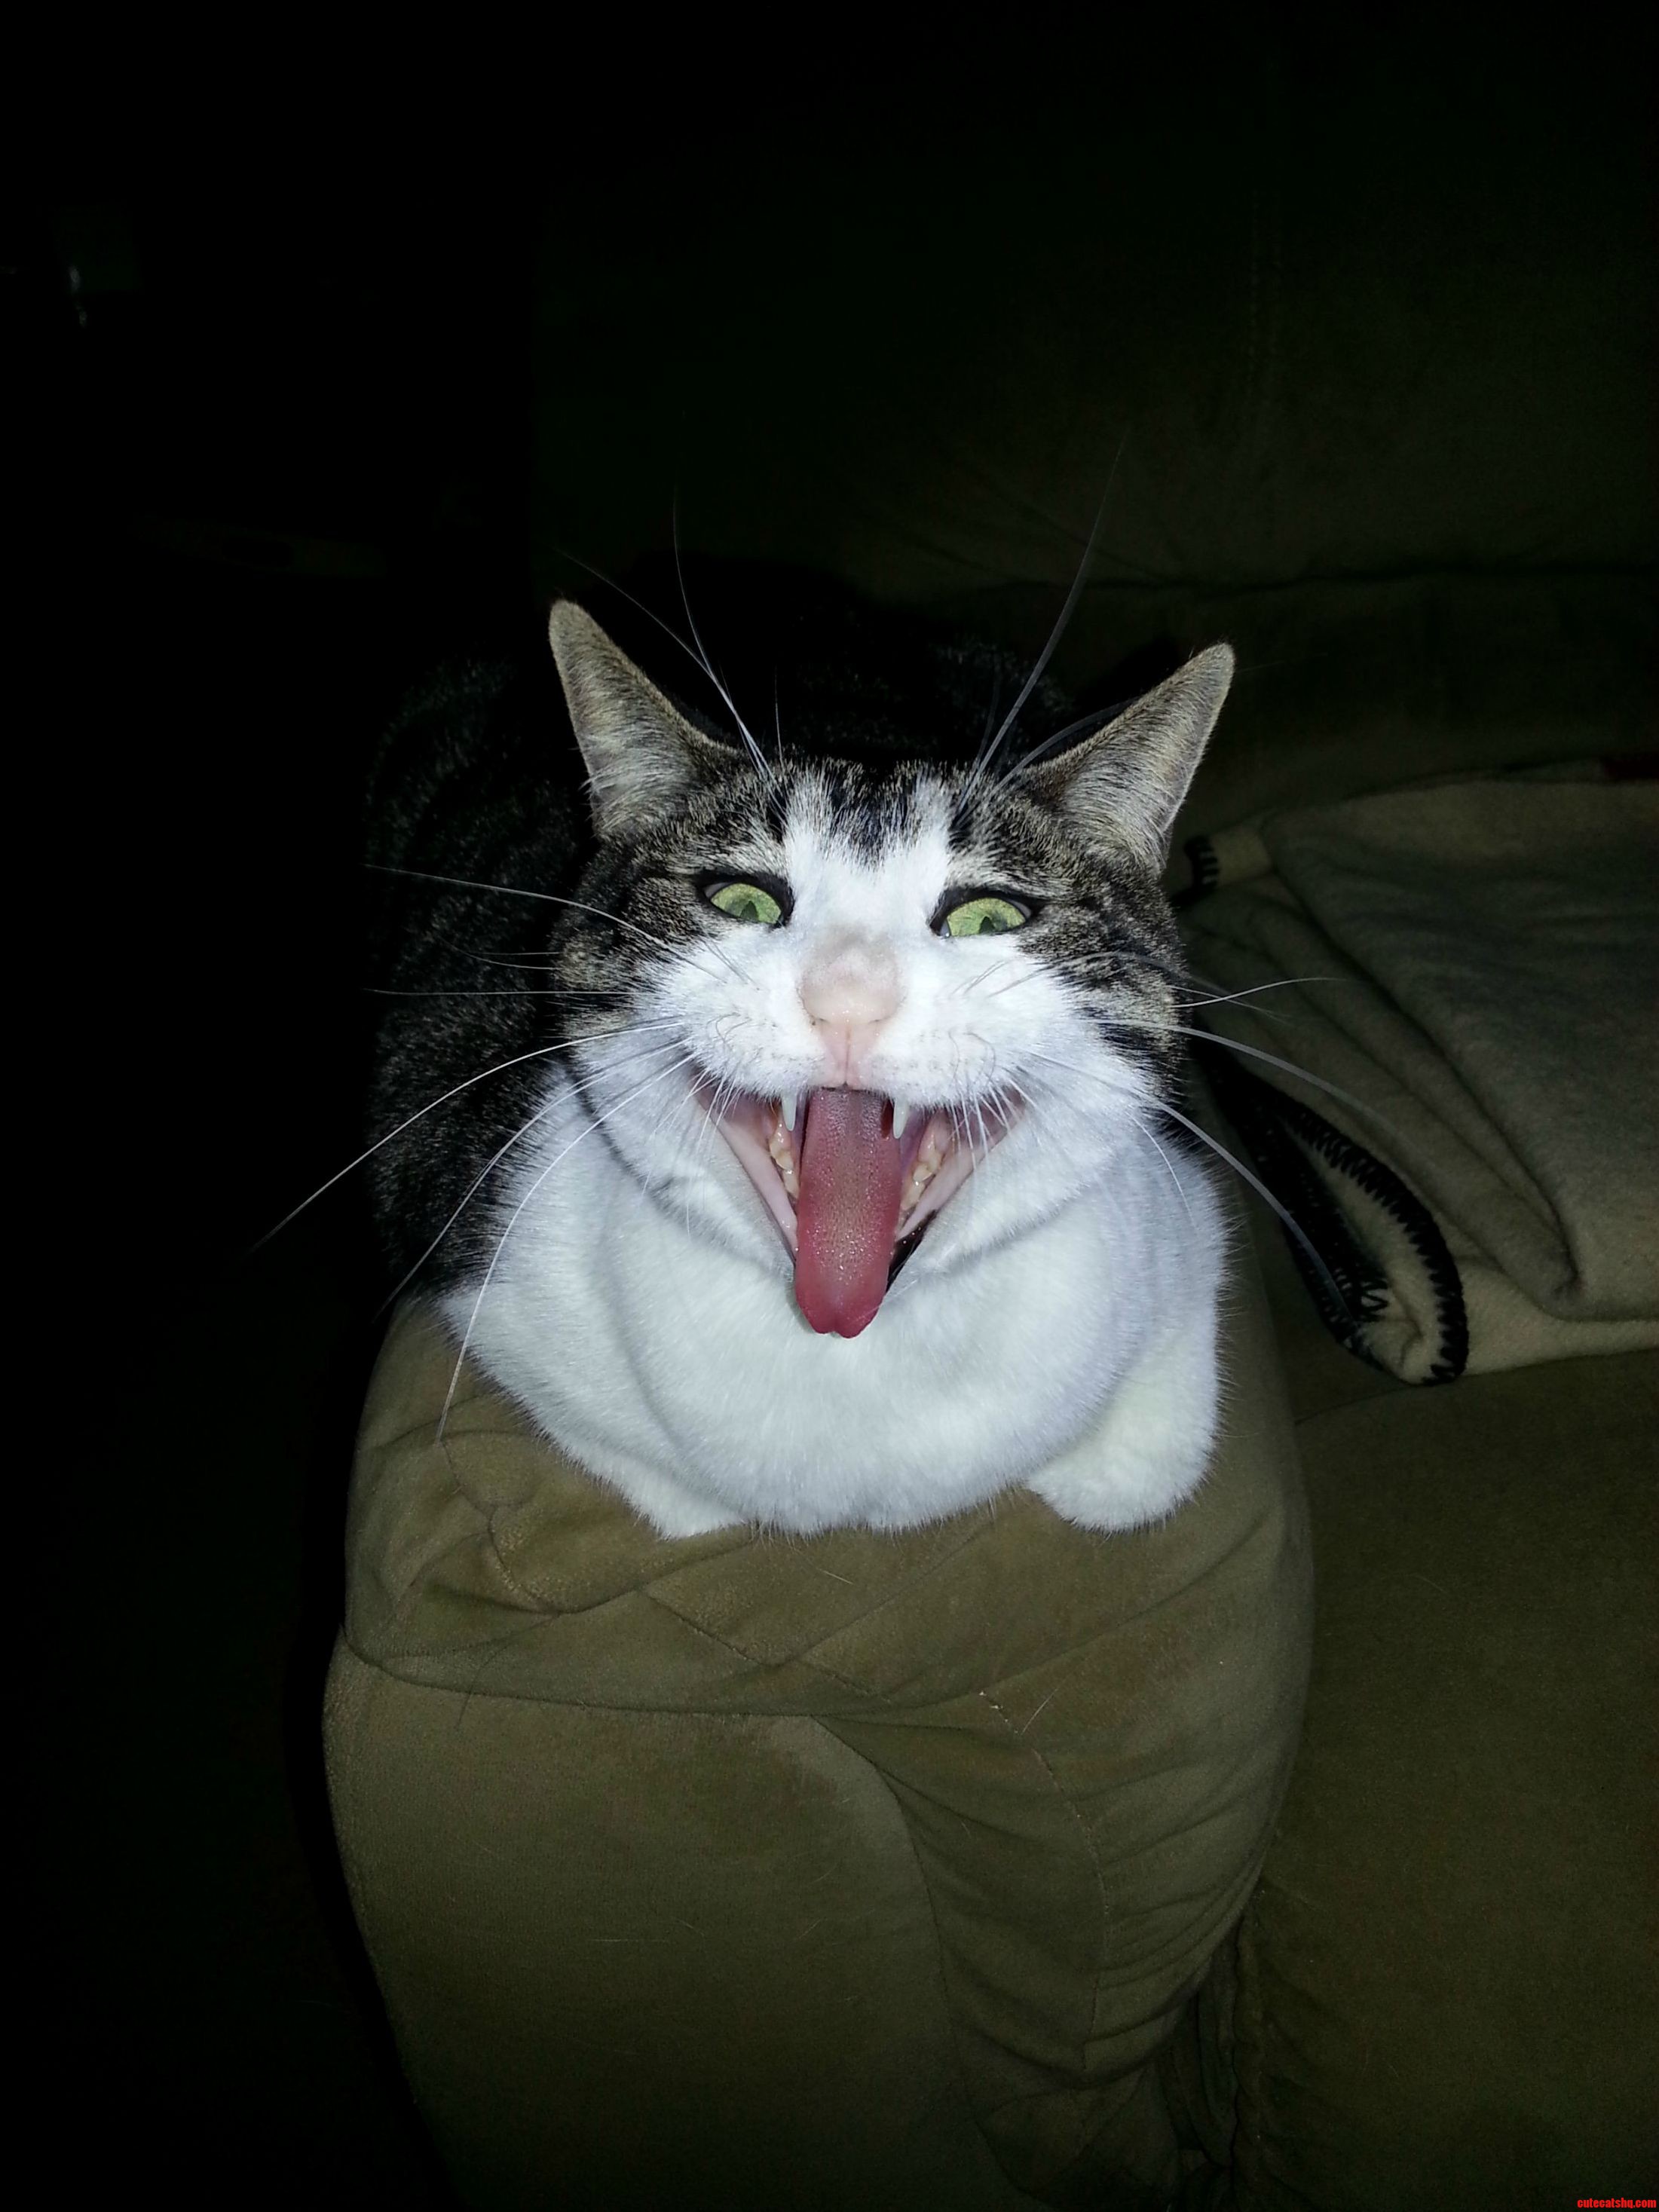 I caught my cat in mid-yawn a little unsettling.